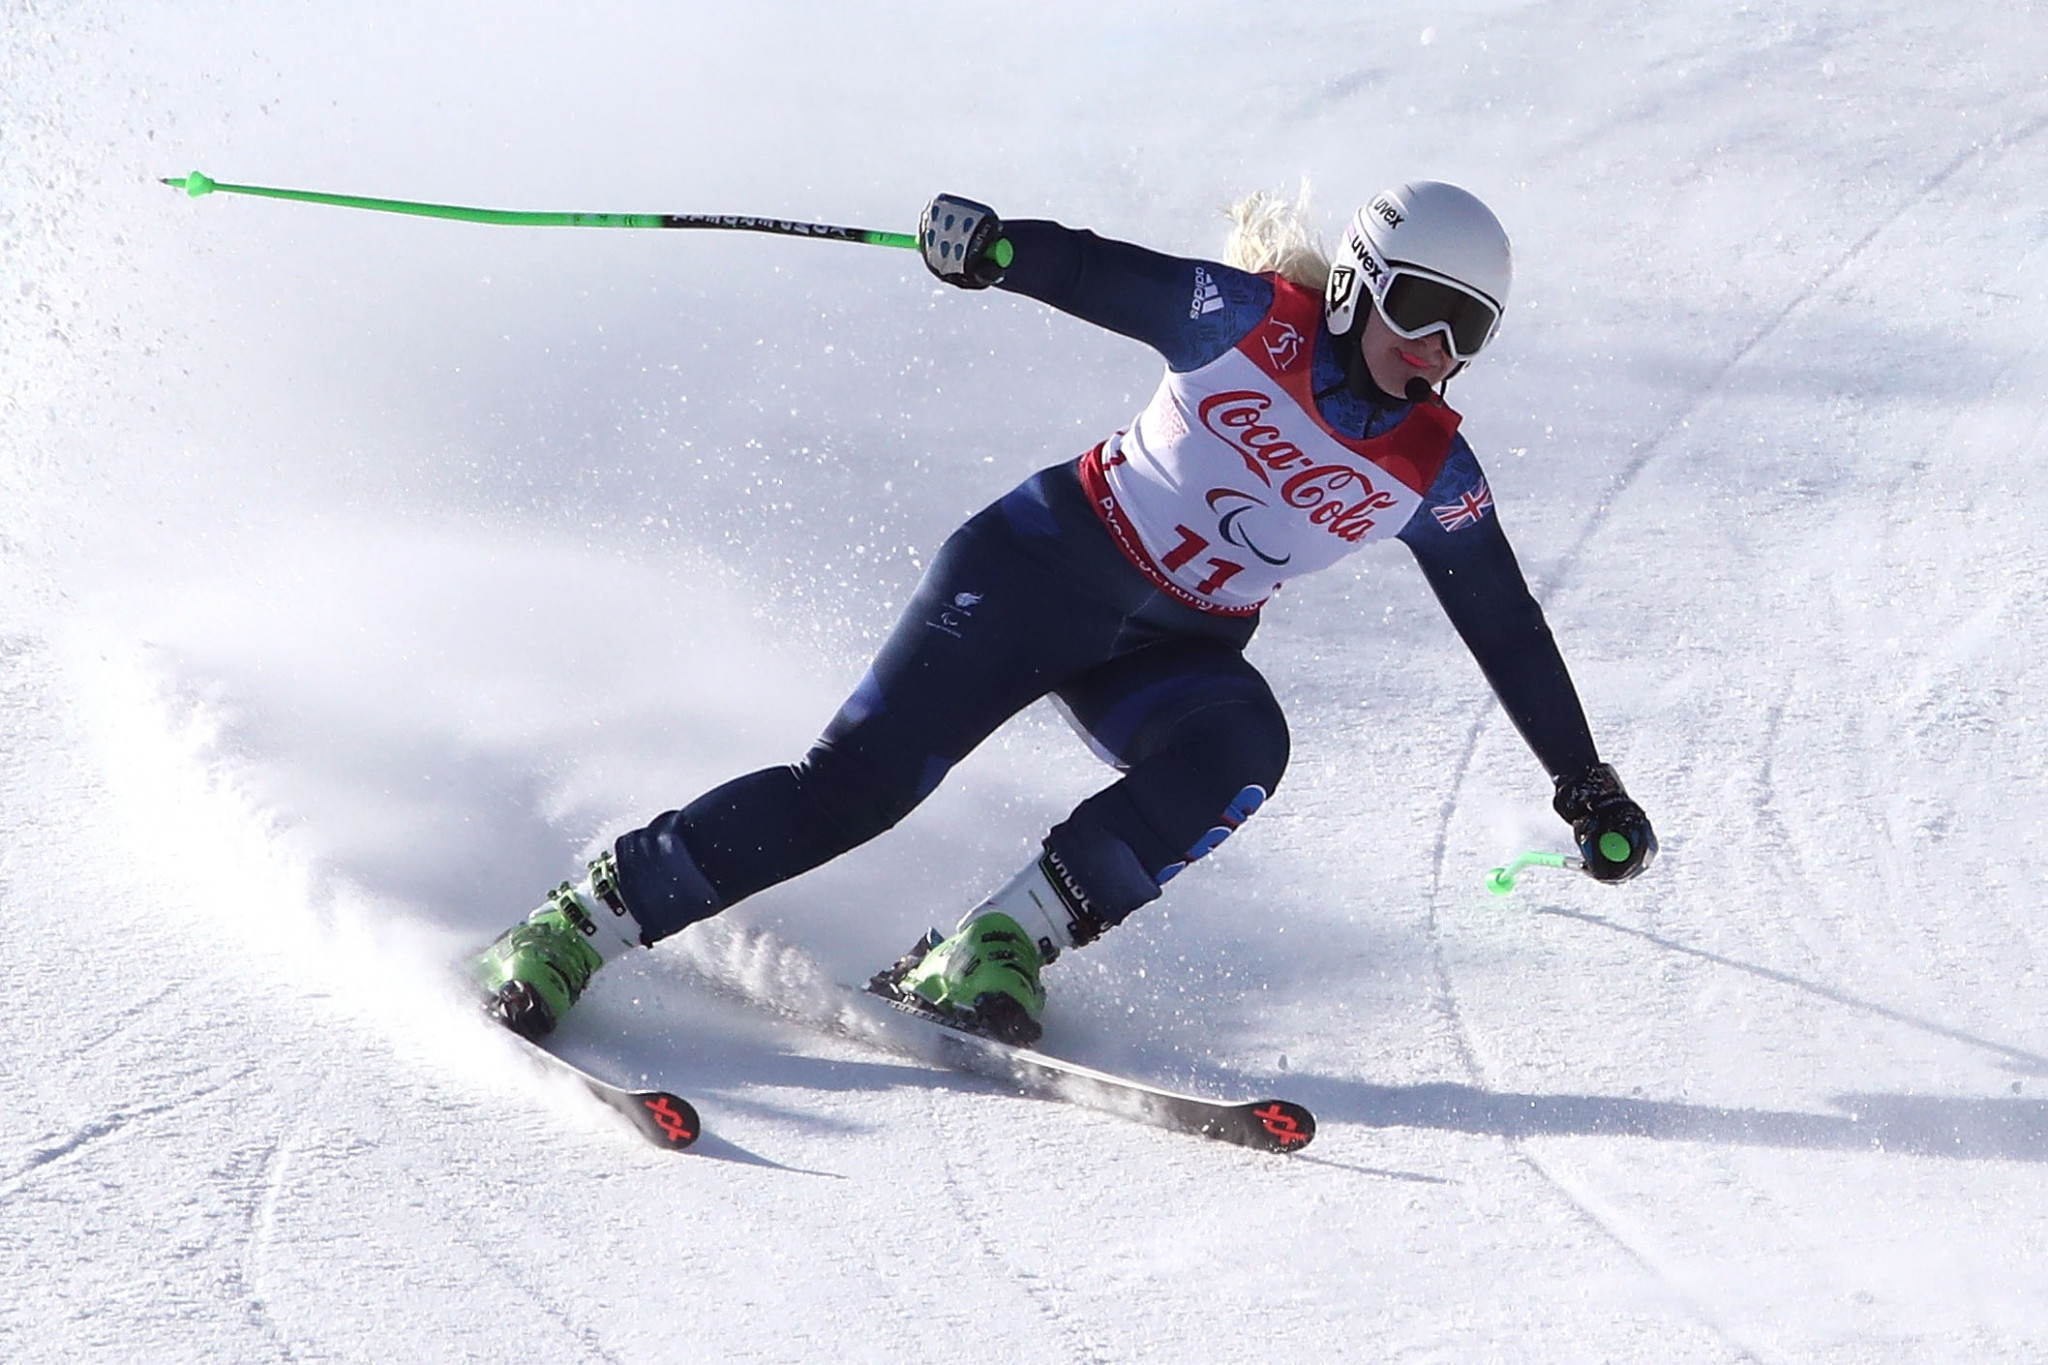 Britain's first-ever Winter Paralympic champion Gallagher retires